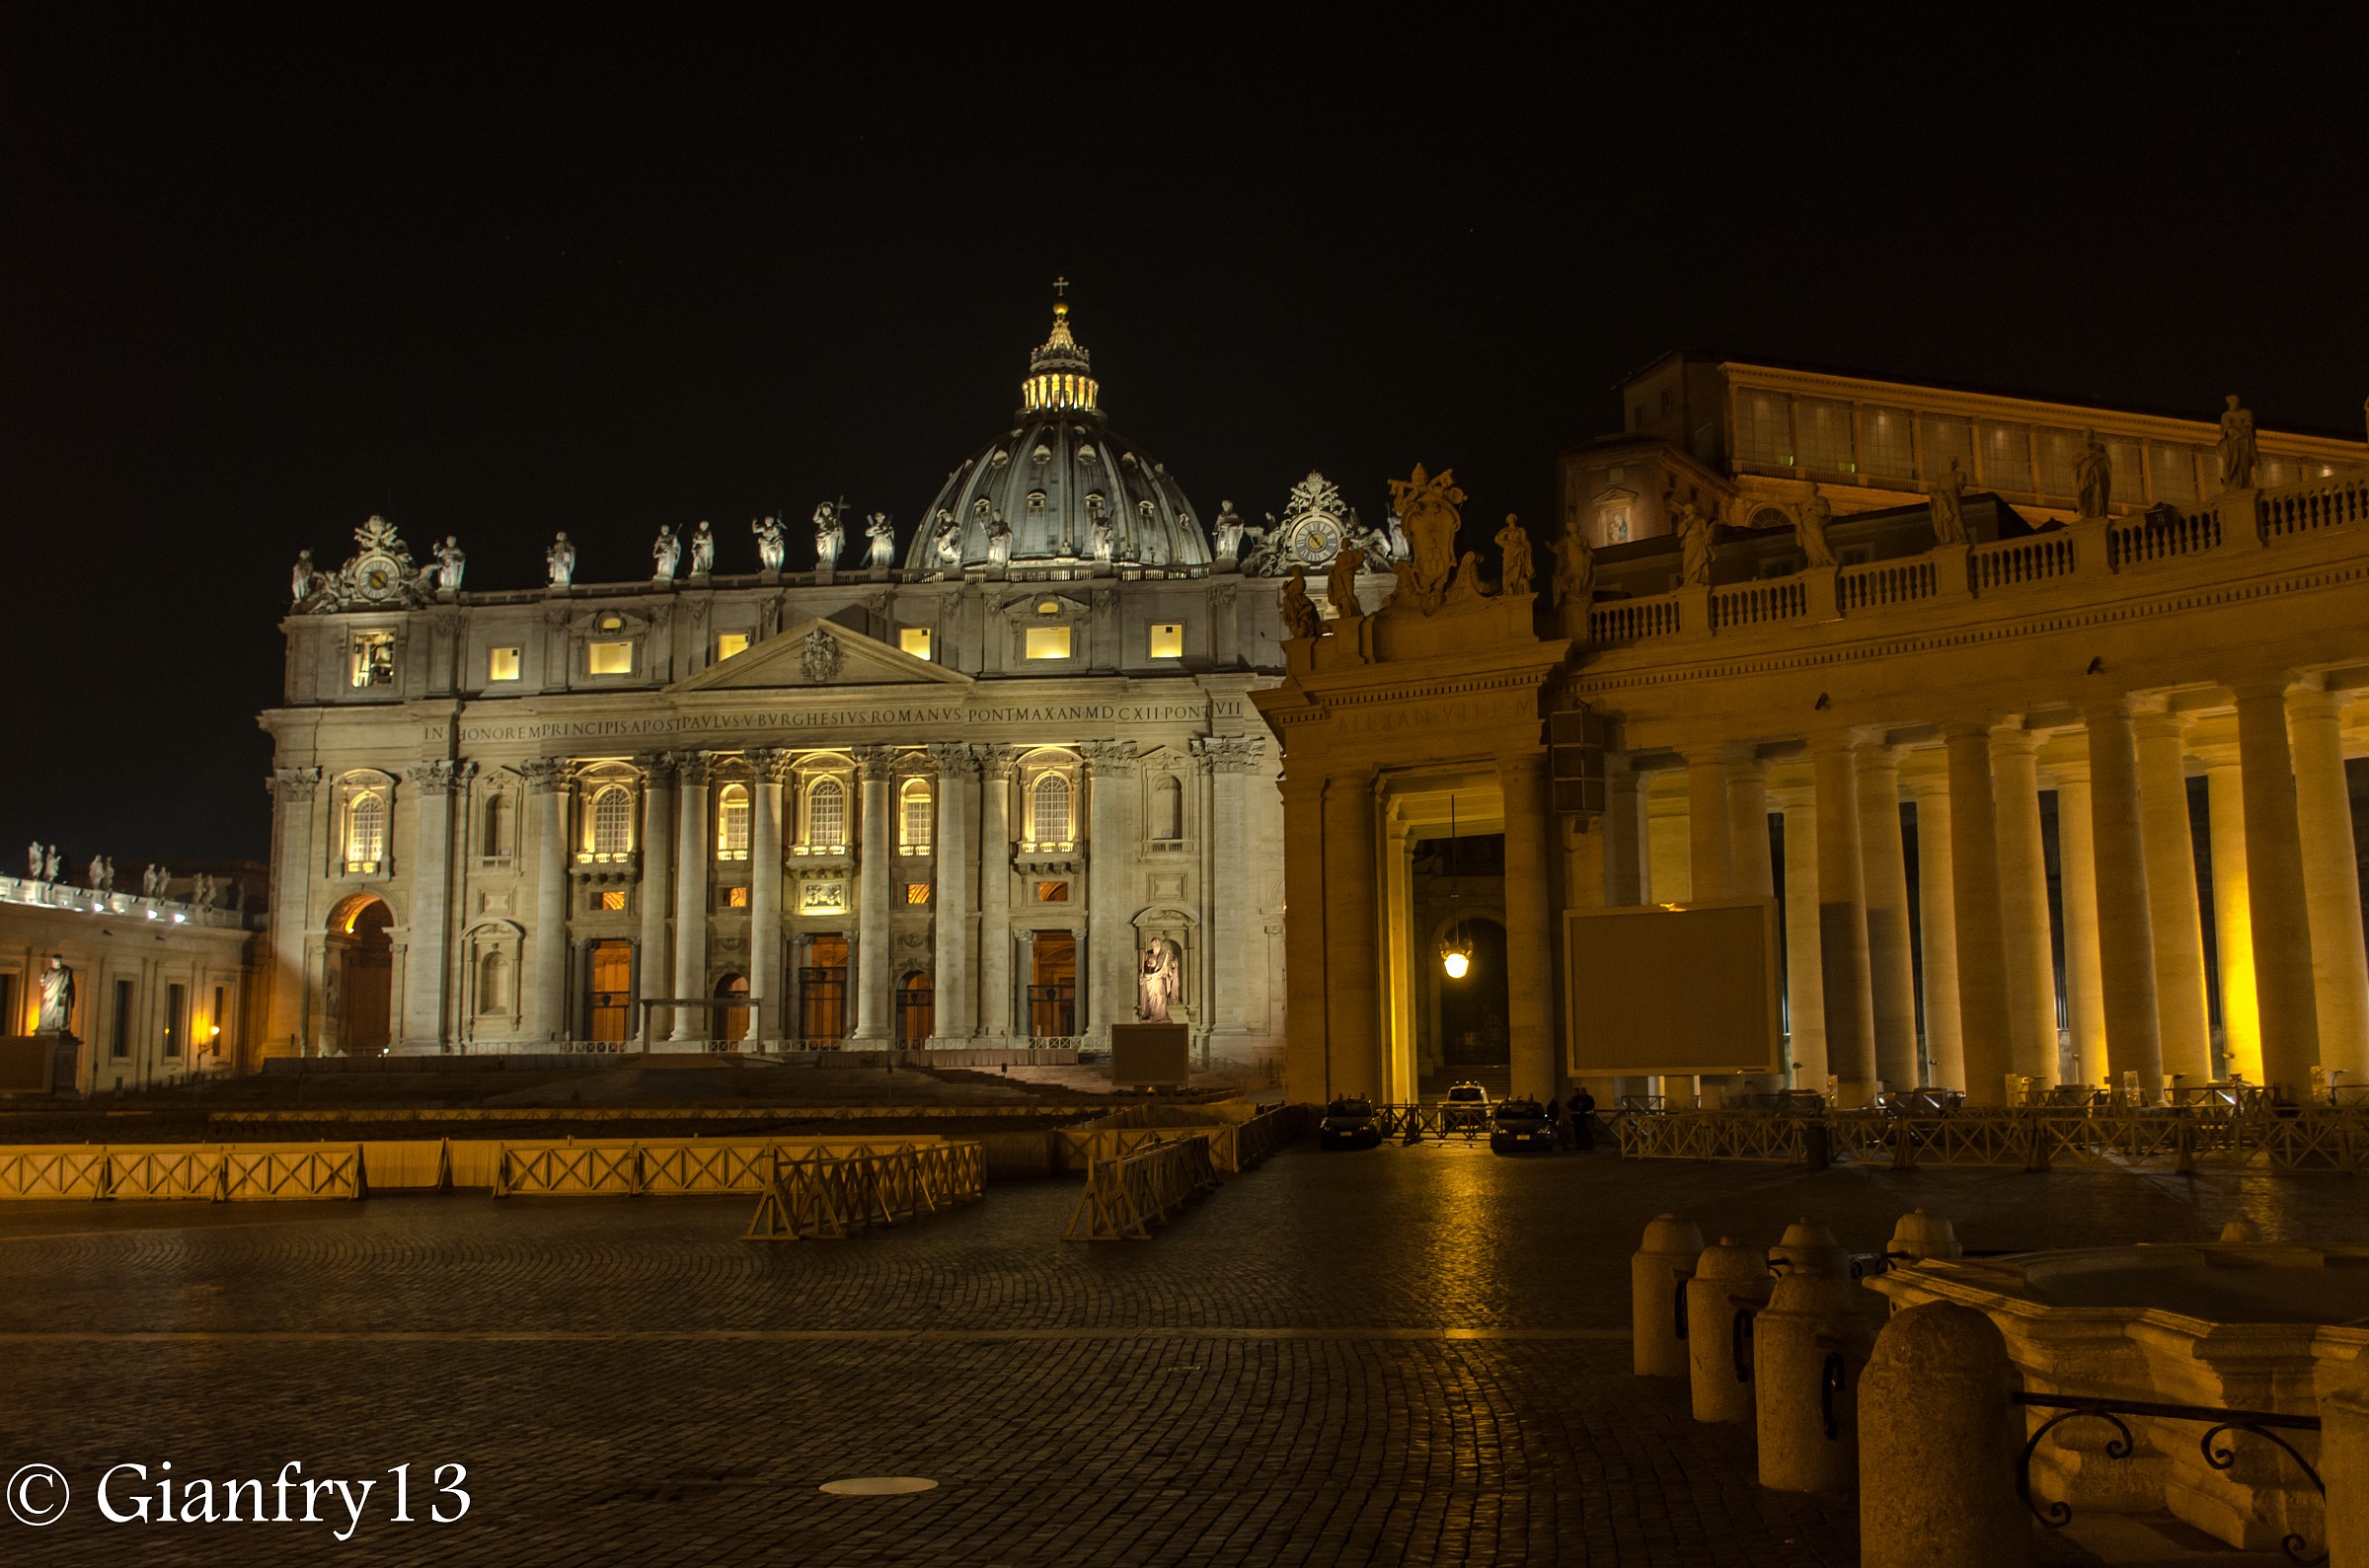 The St. Peter's Square...